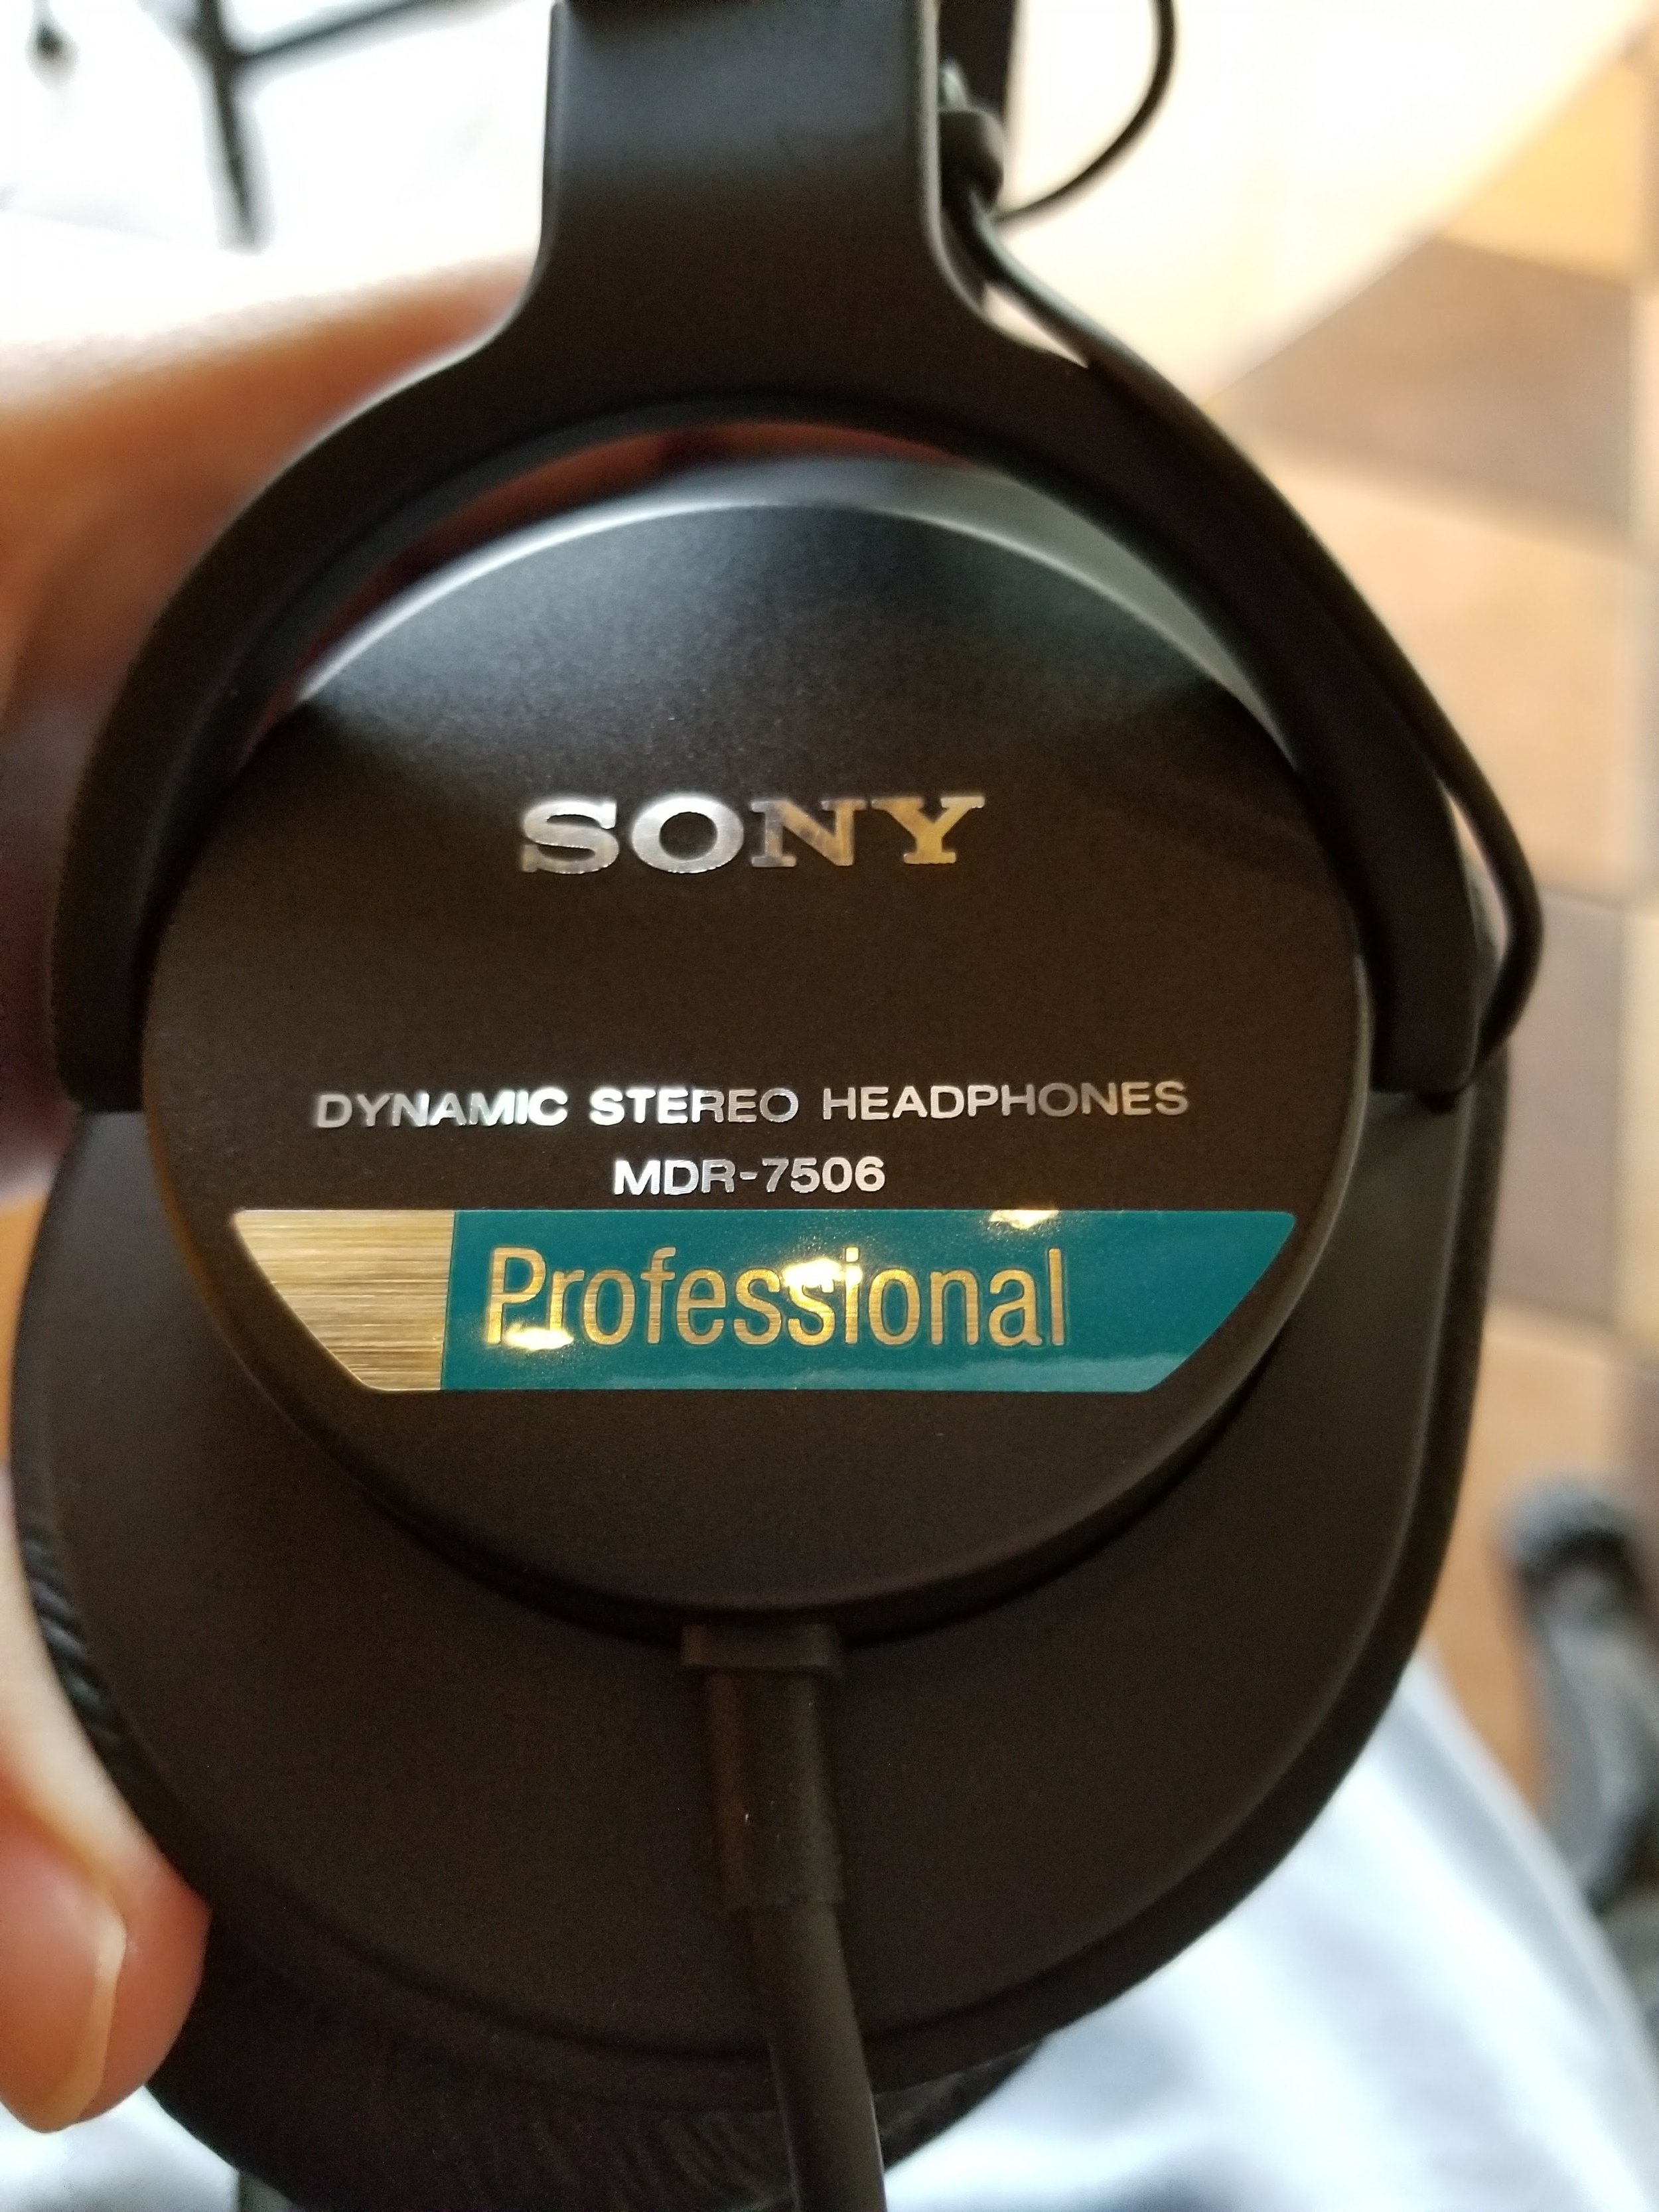 Sony MDR-7506 Headphones 2017 Review: A New Bag! — World 